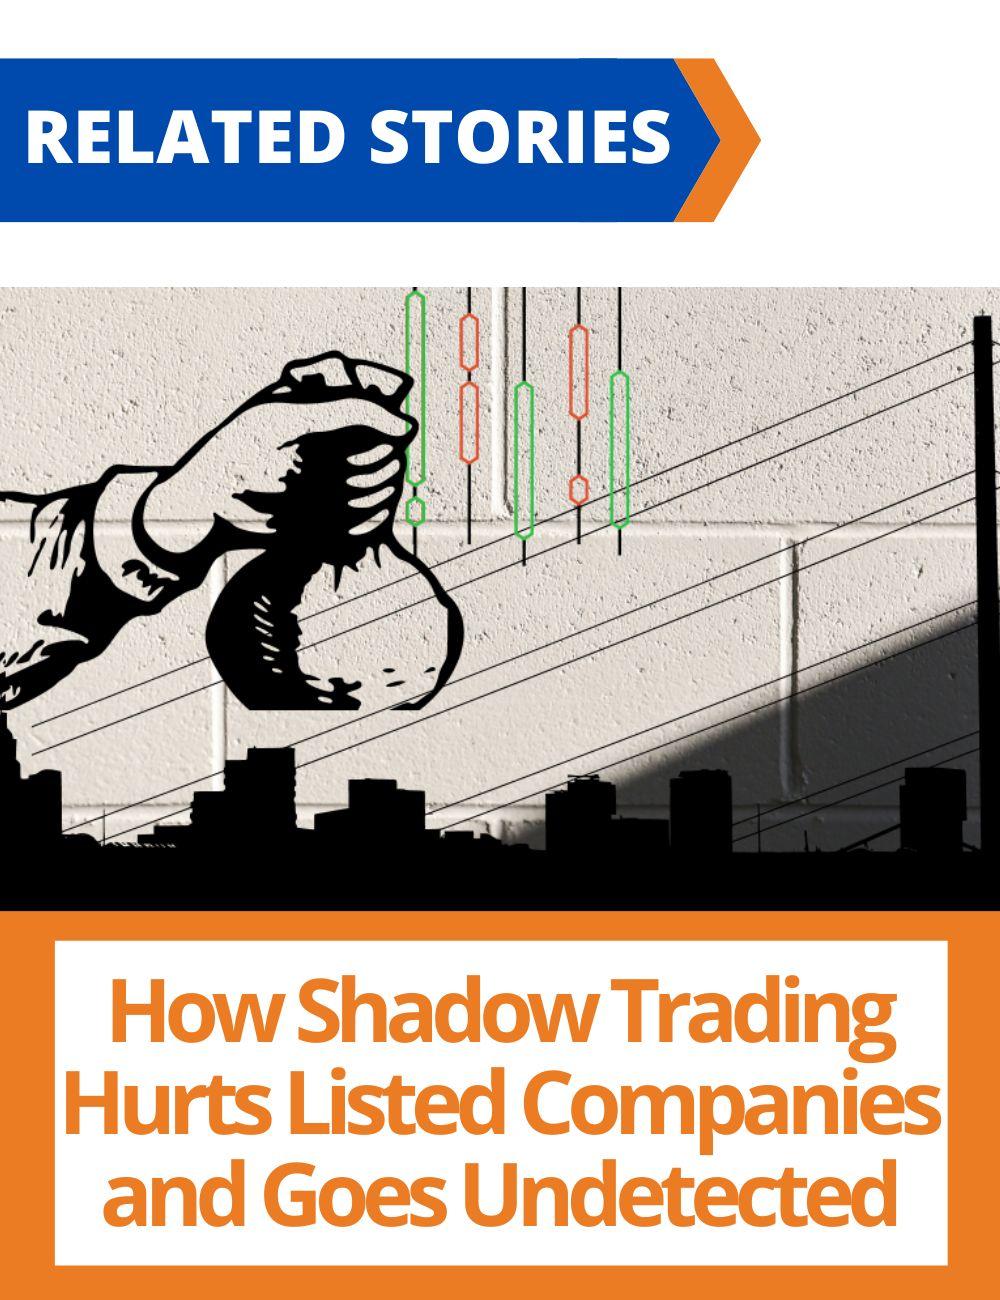 Link to related stories. Image: icons representing shadow trading. Story headline: How Shadow Trading Hurts Listed Companies and Goes Undetected